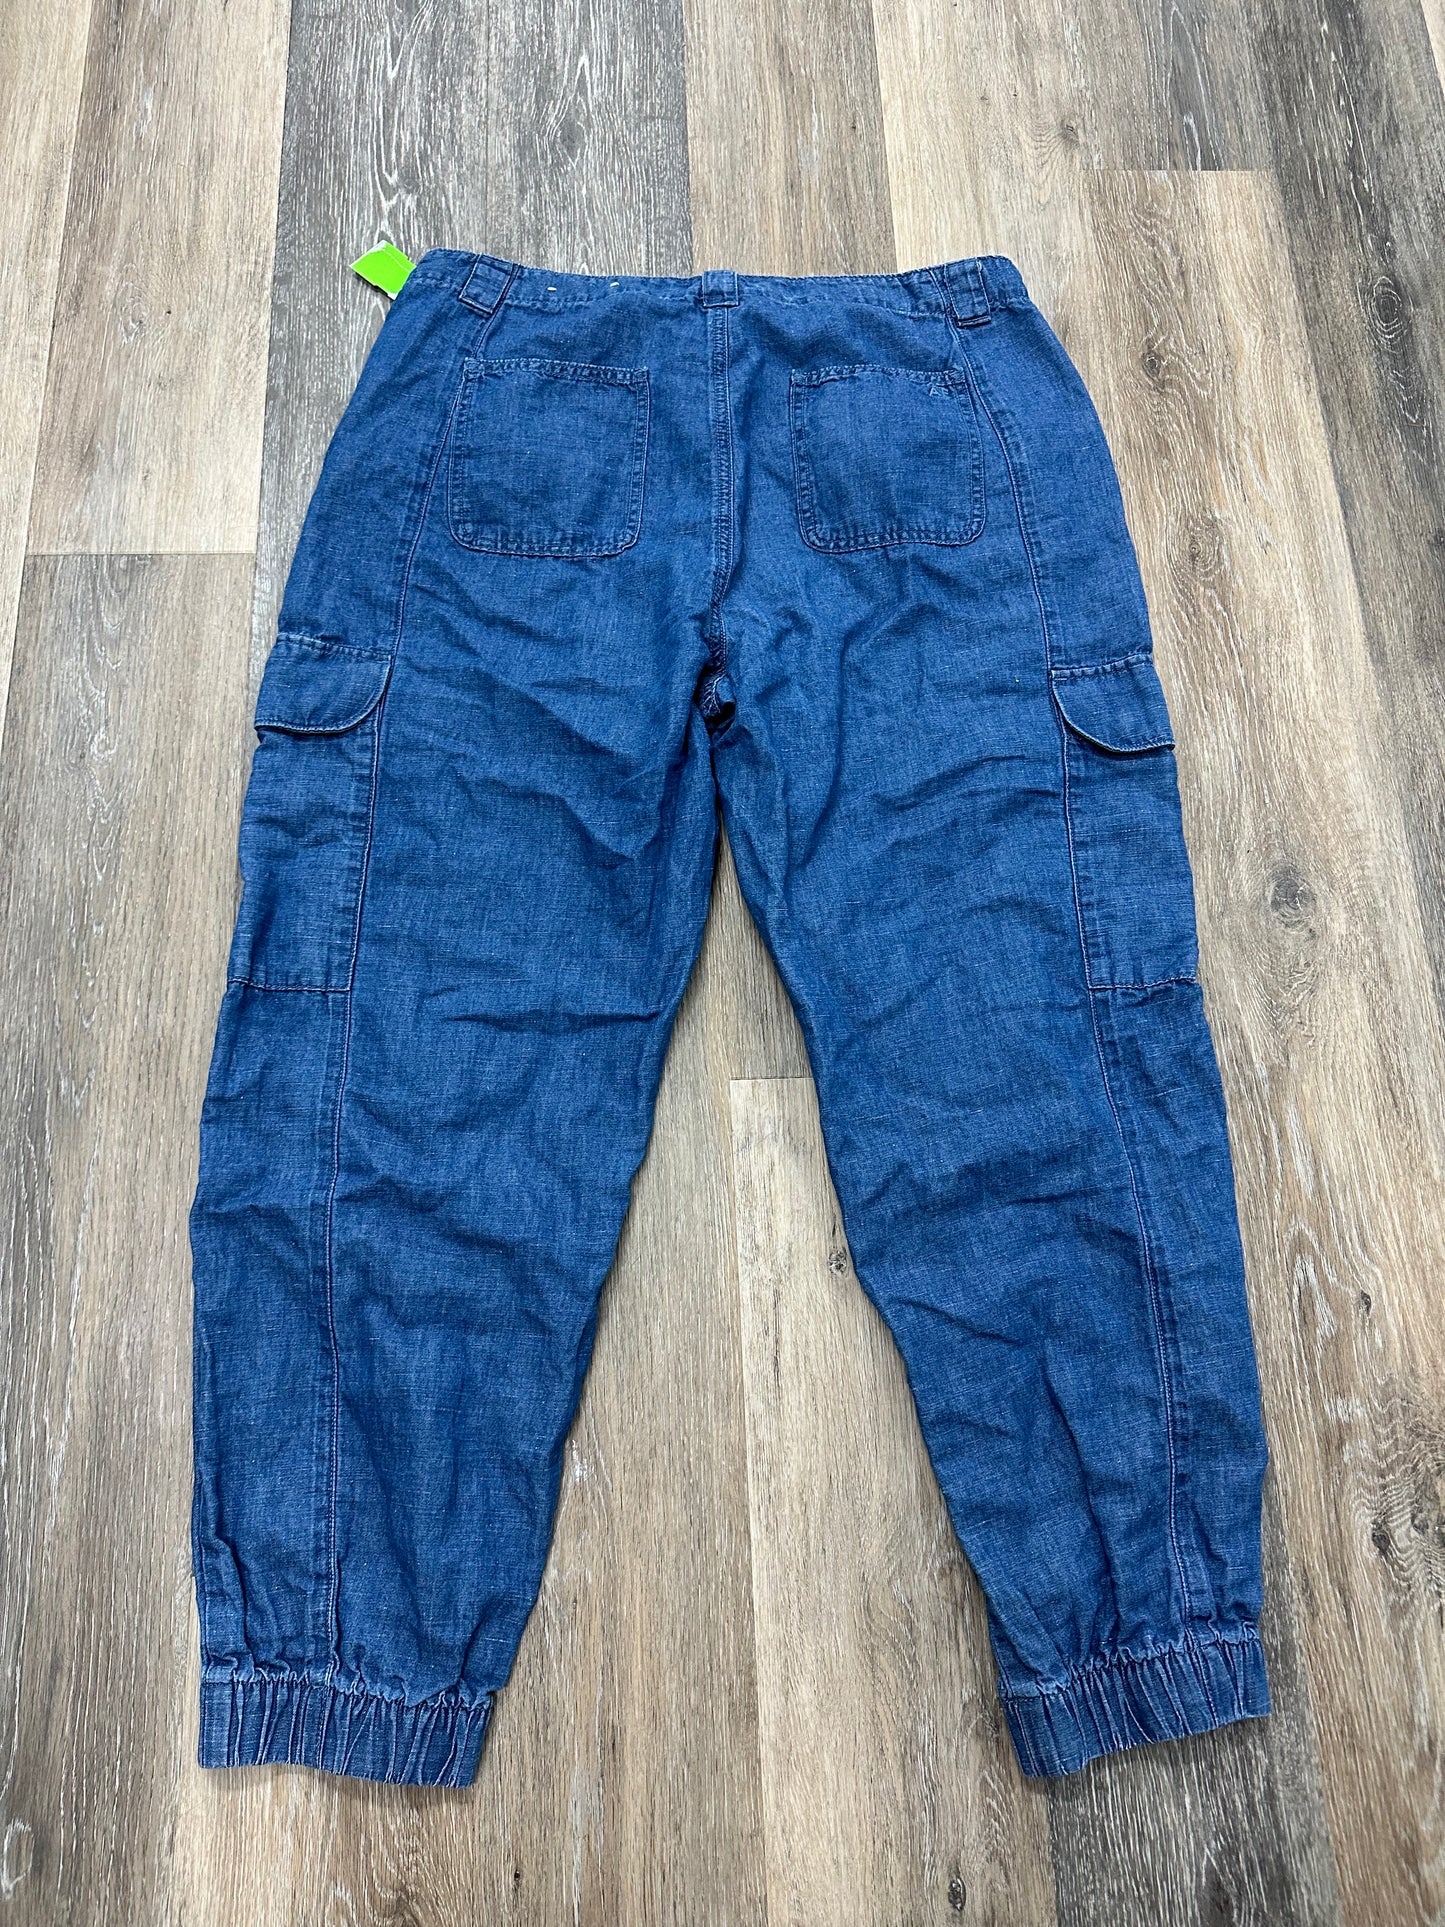 Pants Cargo & Utility By American Eagle  Size: 16